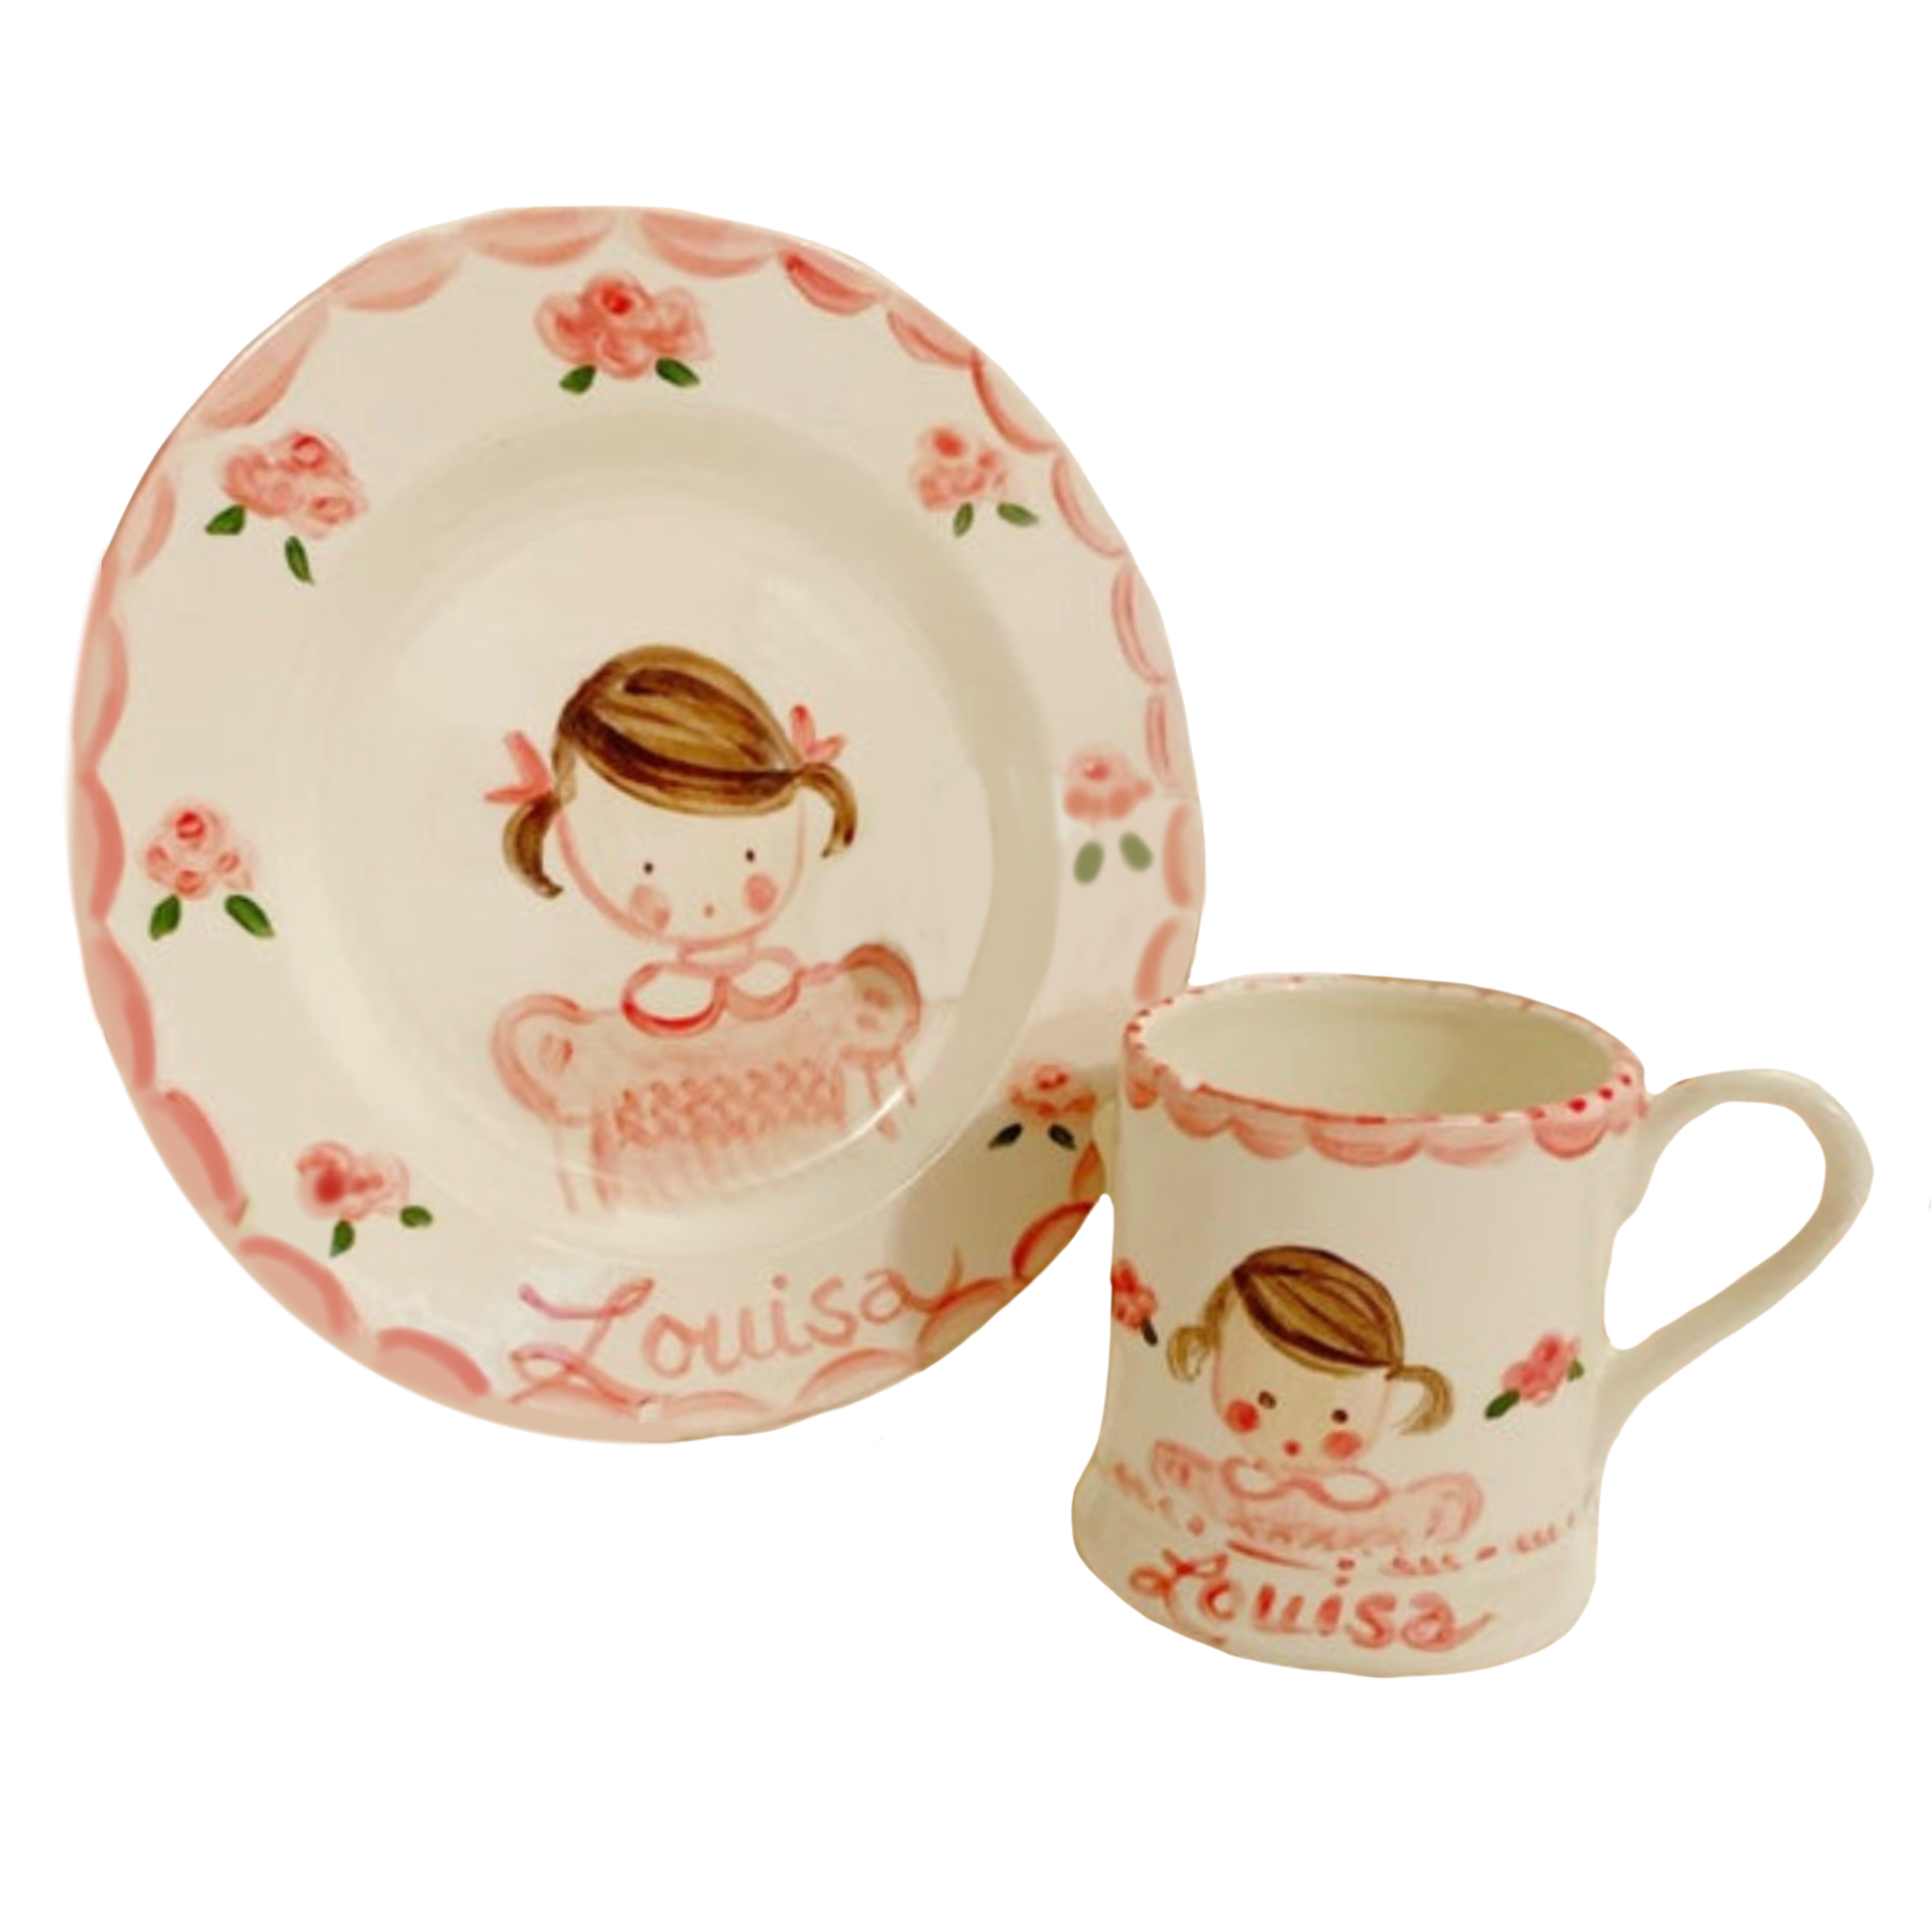 Child's Cup and Plate Set - Girl - Premium  from Tricia Lowenfield Design 